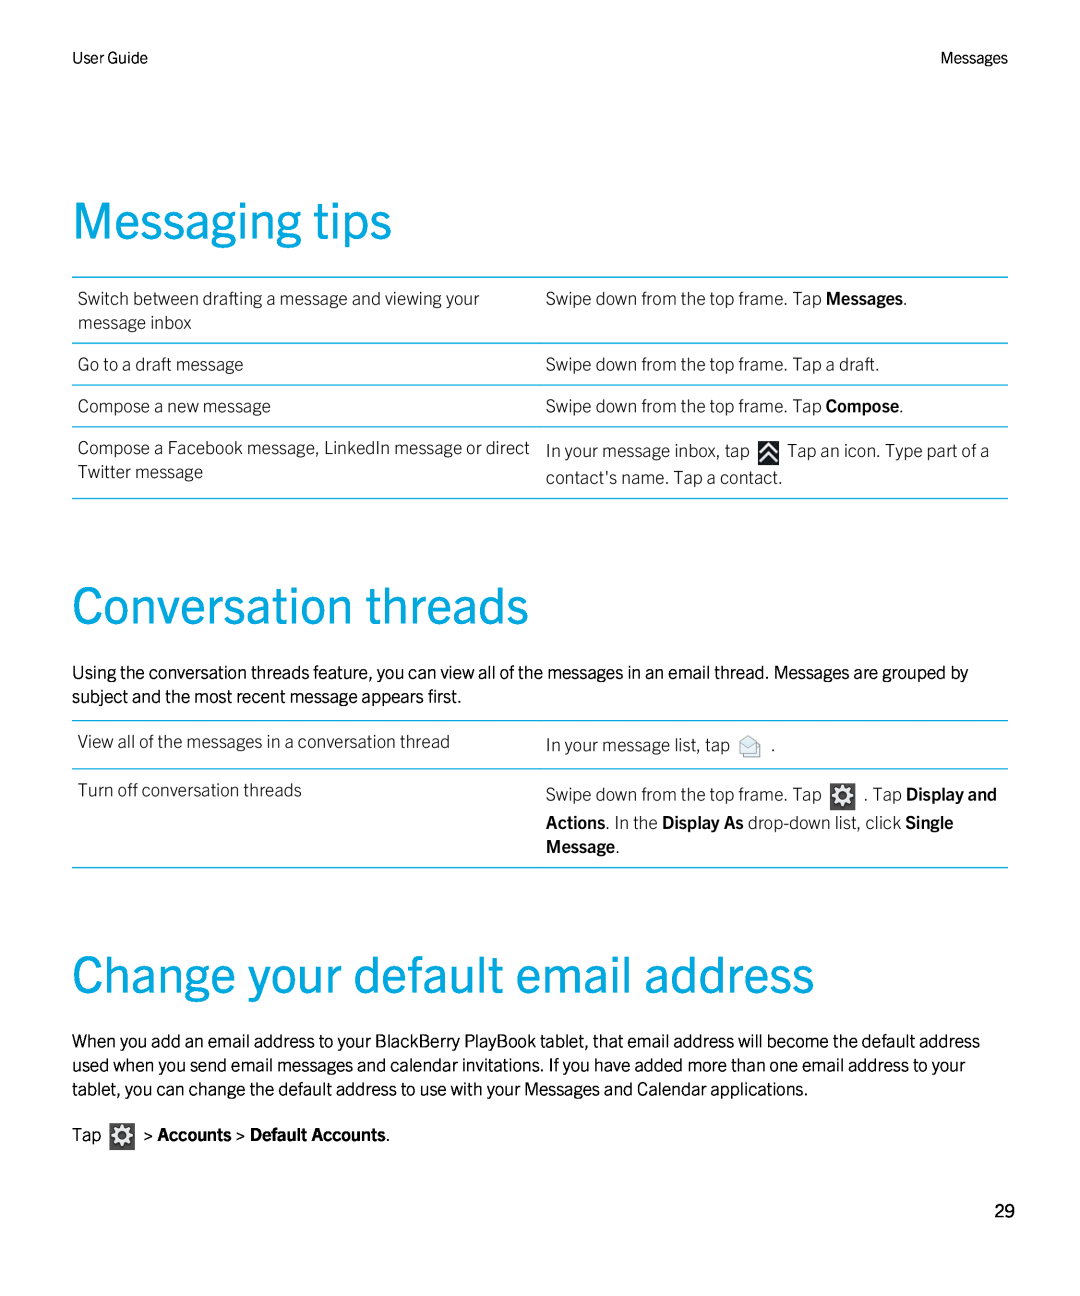 Blackberry 2.0.1 manual Messaging tips, Conversation threads, Change your default email address, Tap Display and, Message 